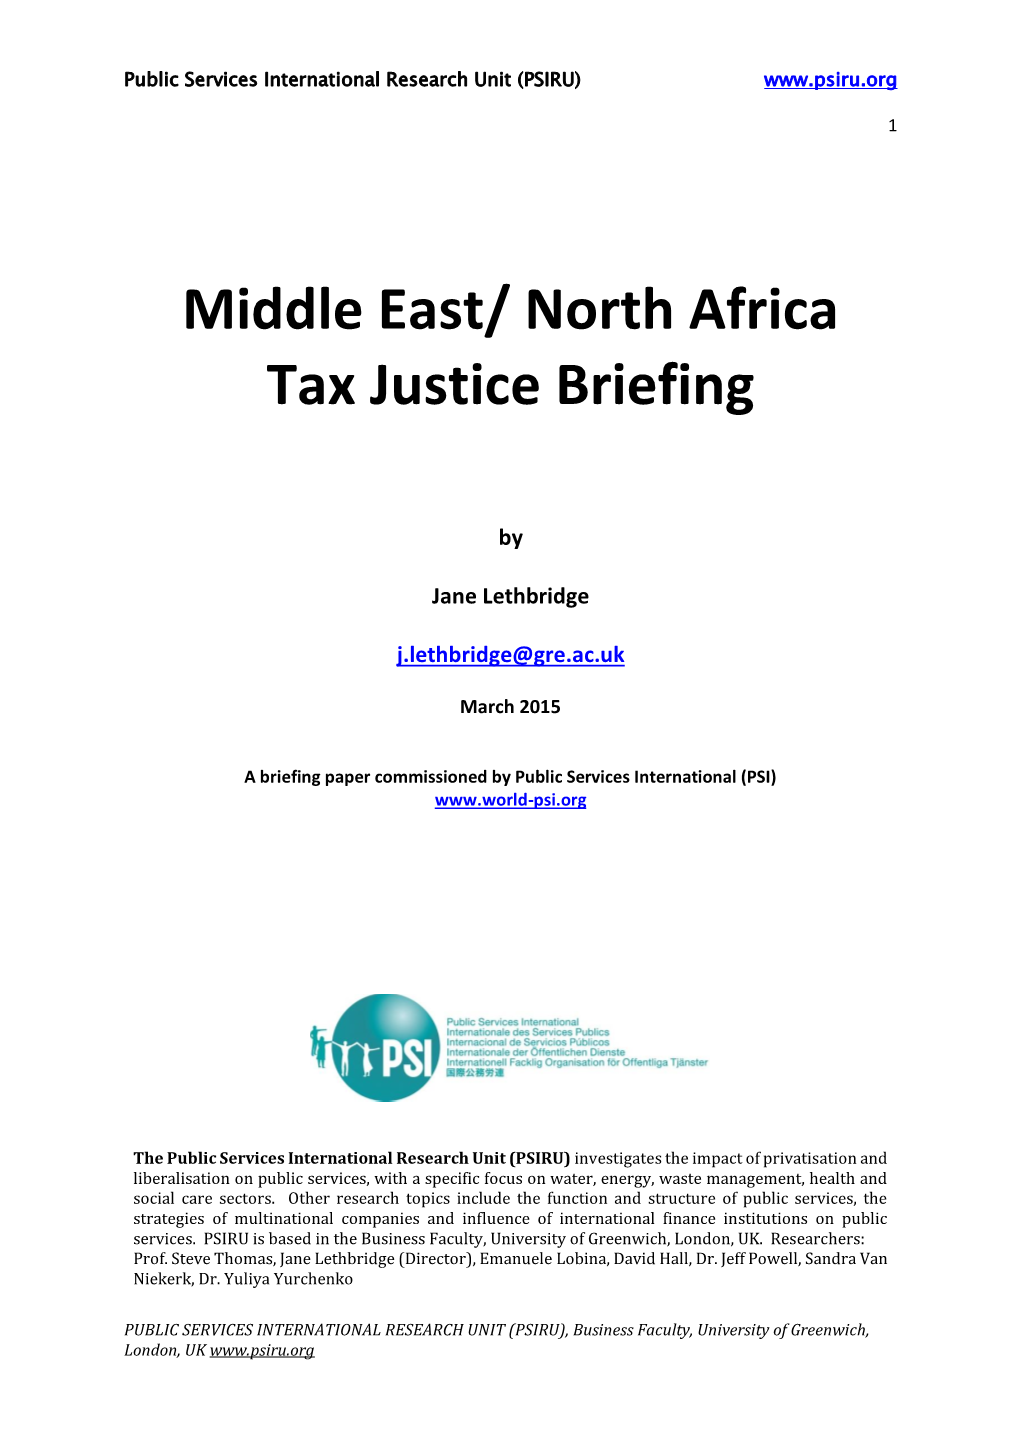 Middle East/ North Africa Tax Justice Briefing